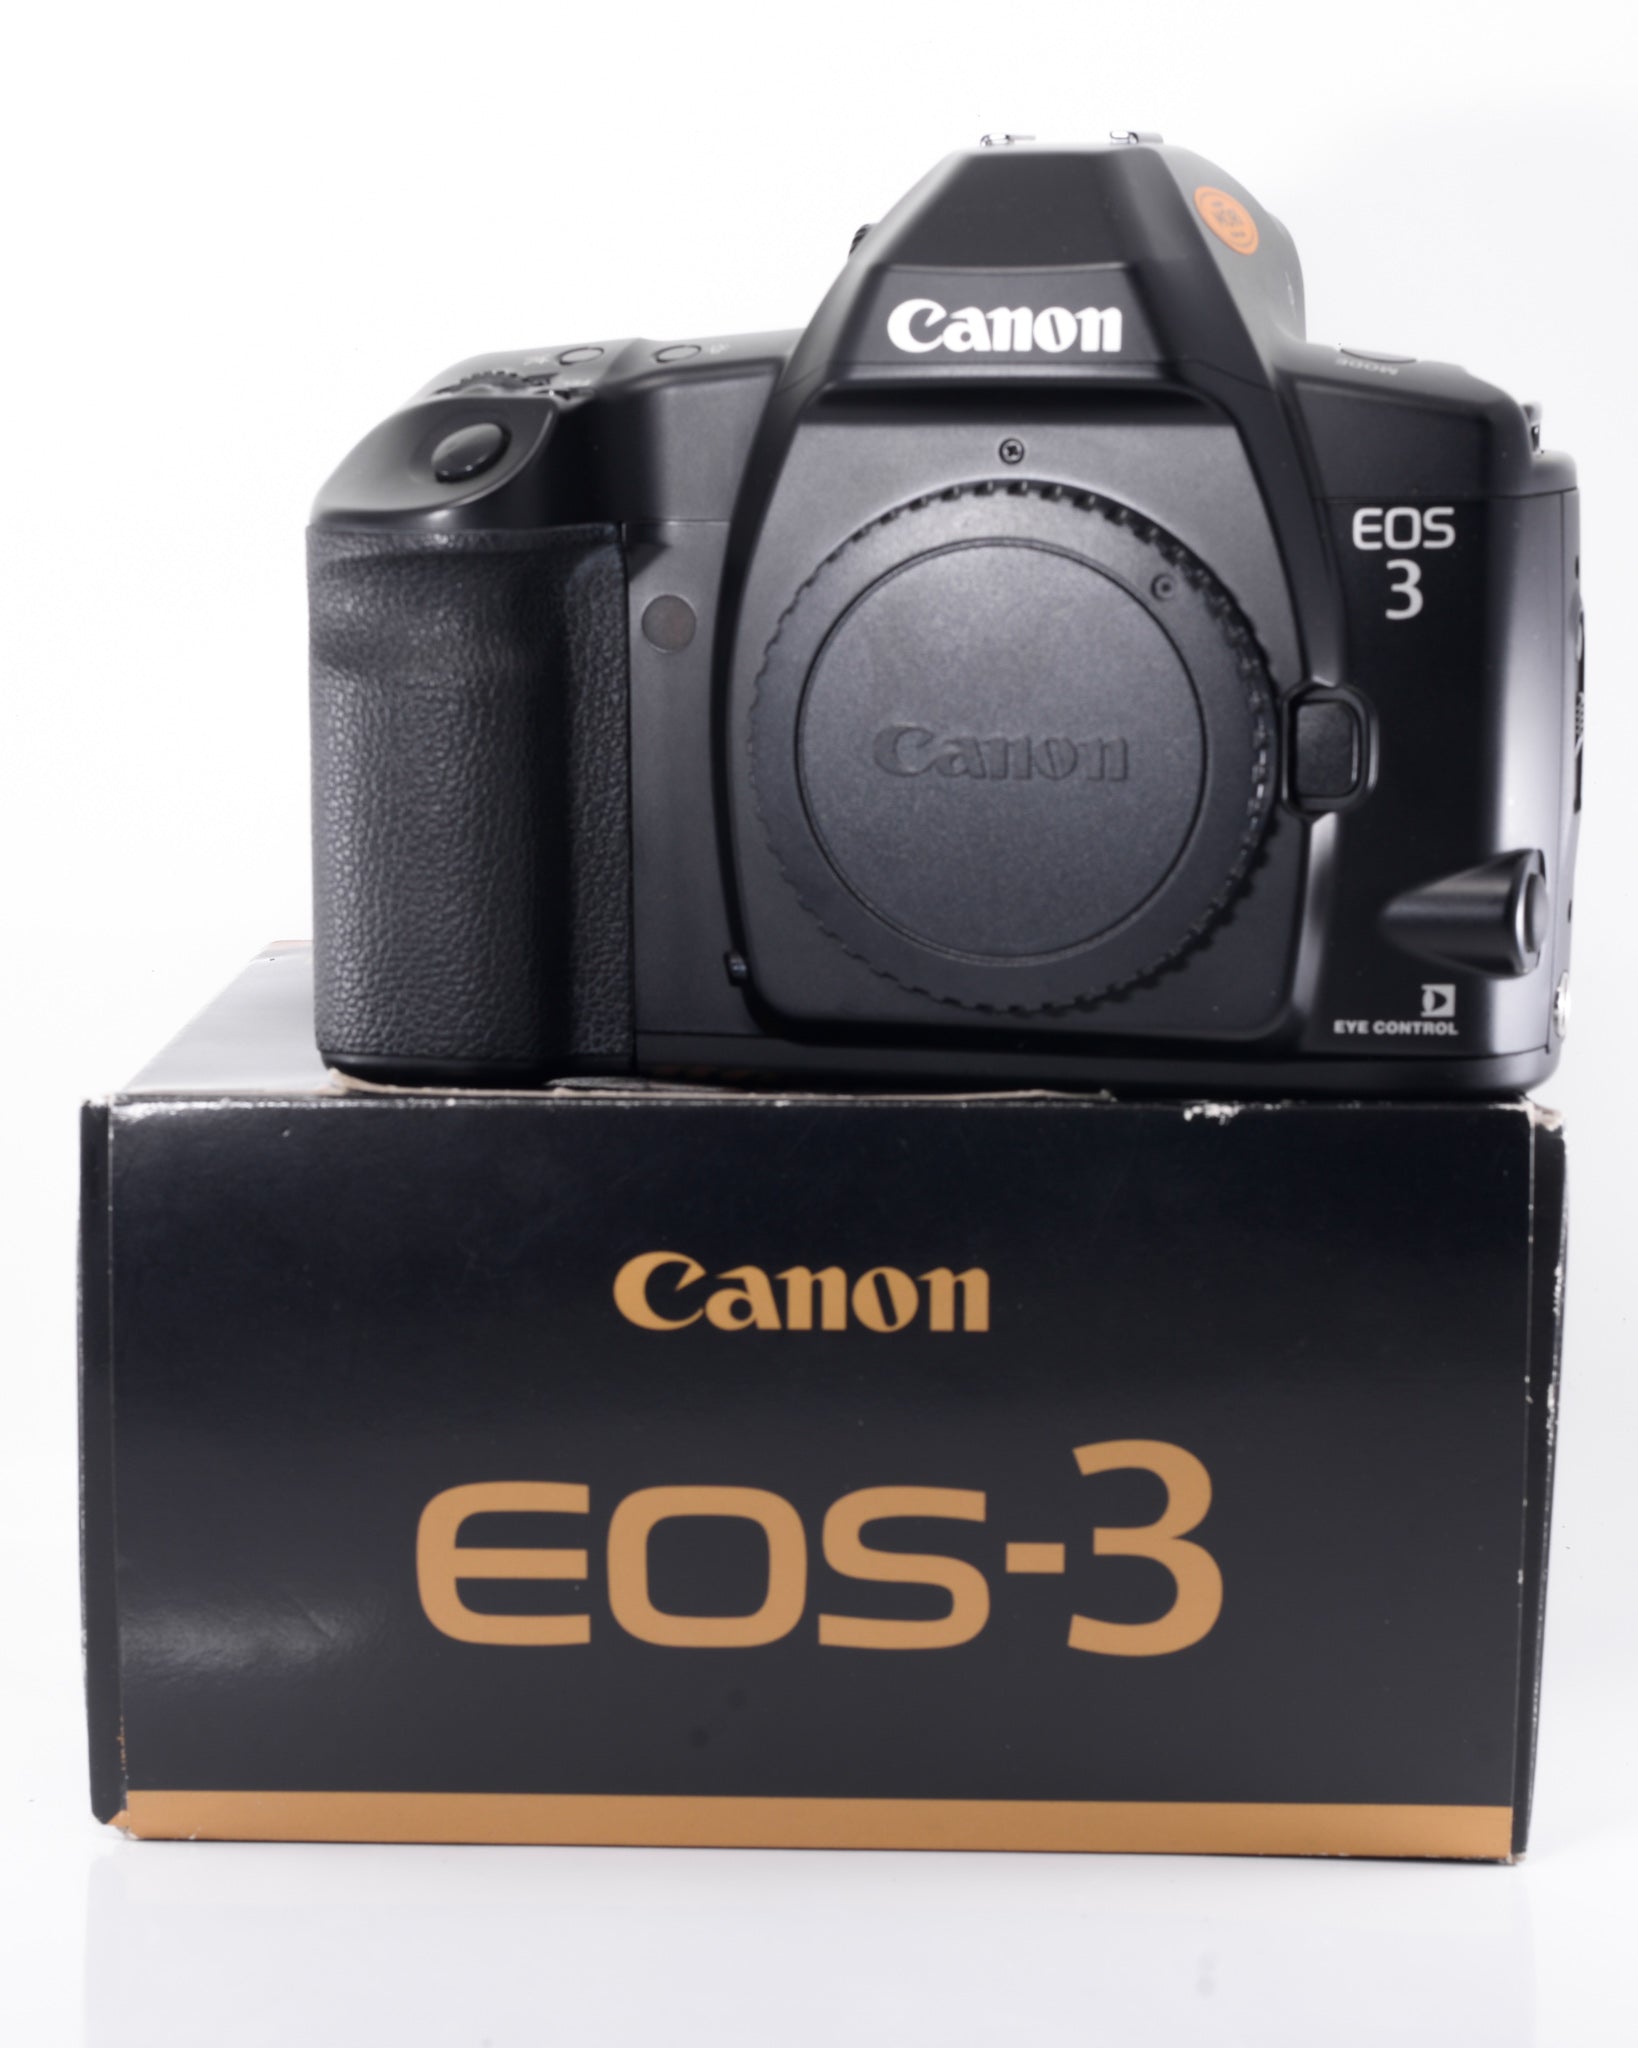 BOXED Canon EOS-3 35mm SLR Film Camera body only